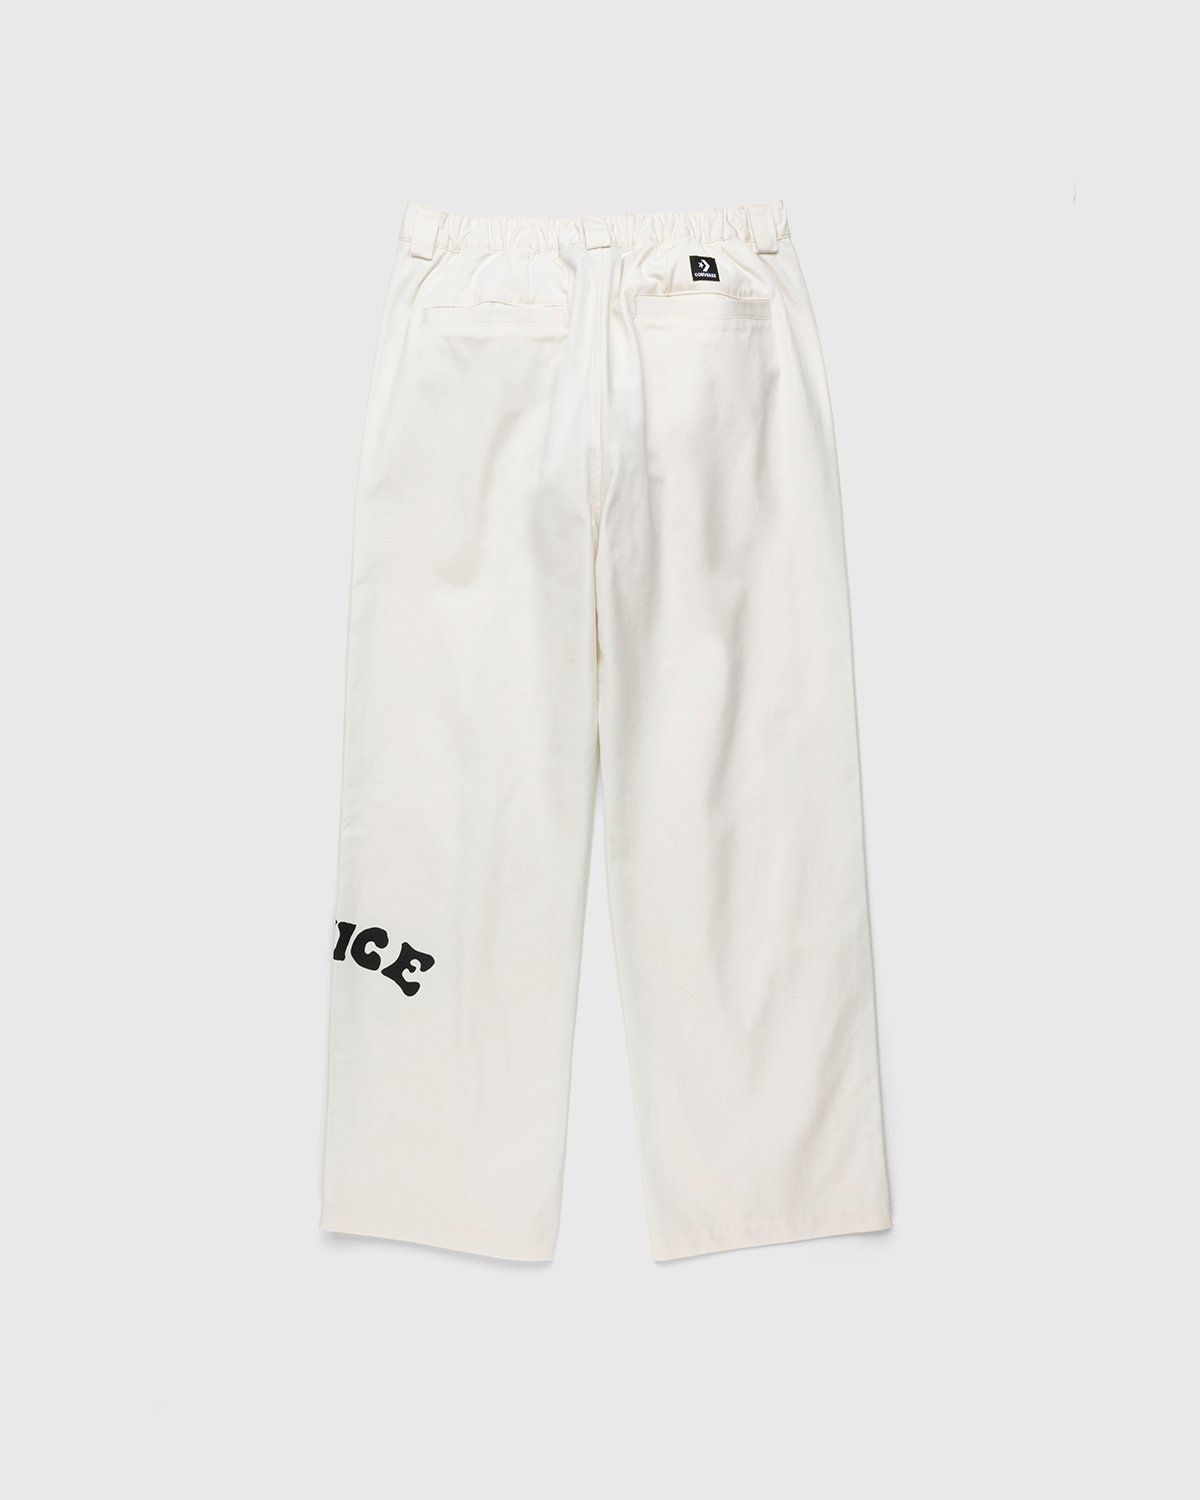 Converse – Much Love Double Pleat Chino Pant Egret - Pants - White - Image 2